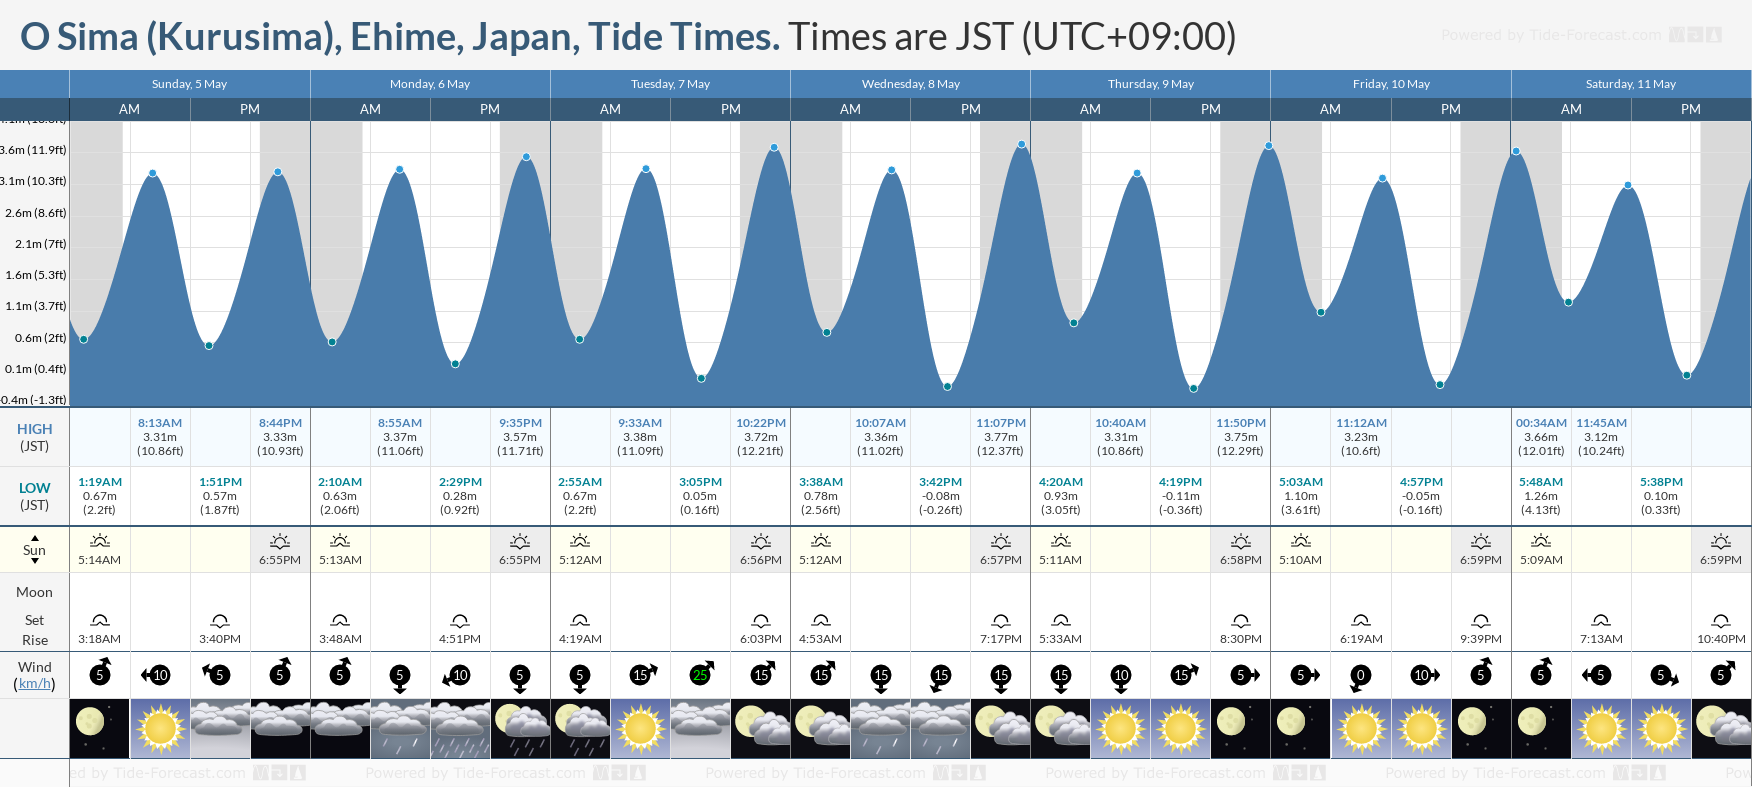 O Sima (Kurusima), Ehime, Japan Tide Chart including high and low tide tide times for the next 7 days